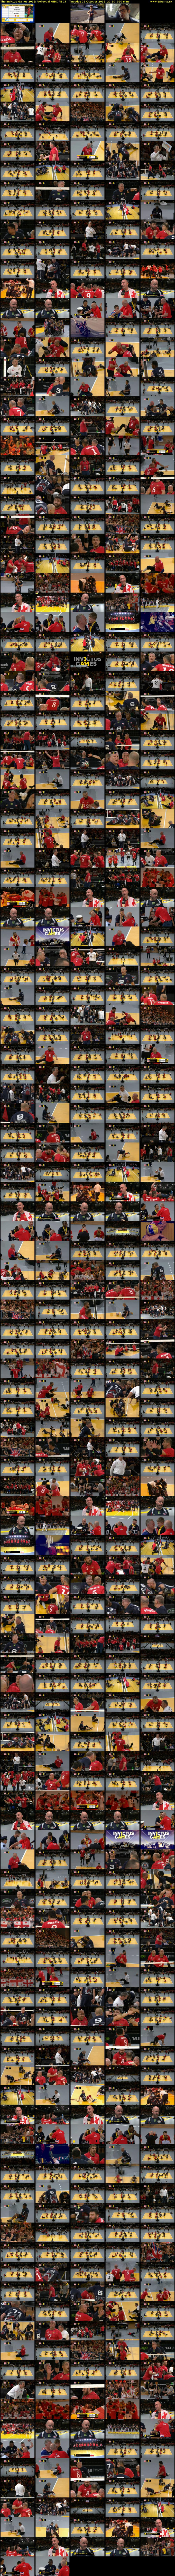 The Invictus Games 2018: Volleyball (BBC RB 1) Tuesday 23 October 2018 22:30 - 04:30